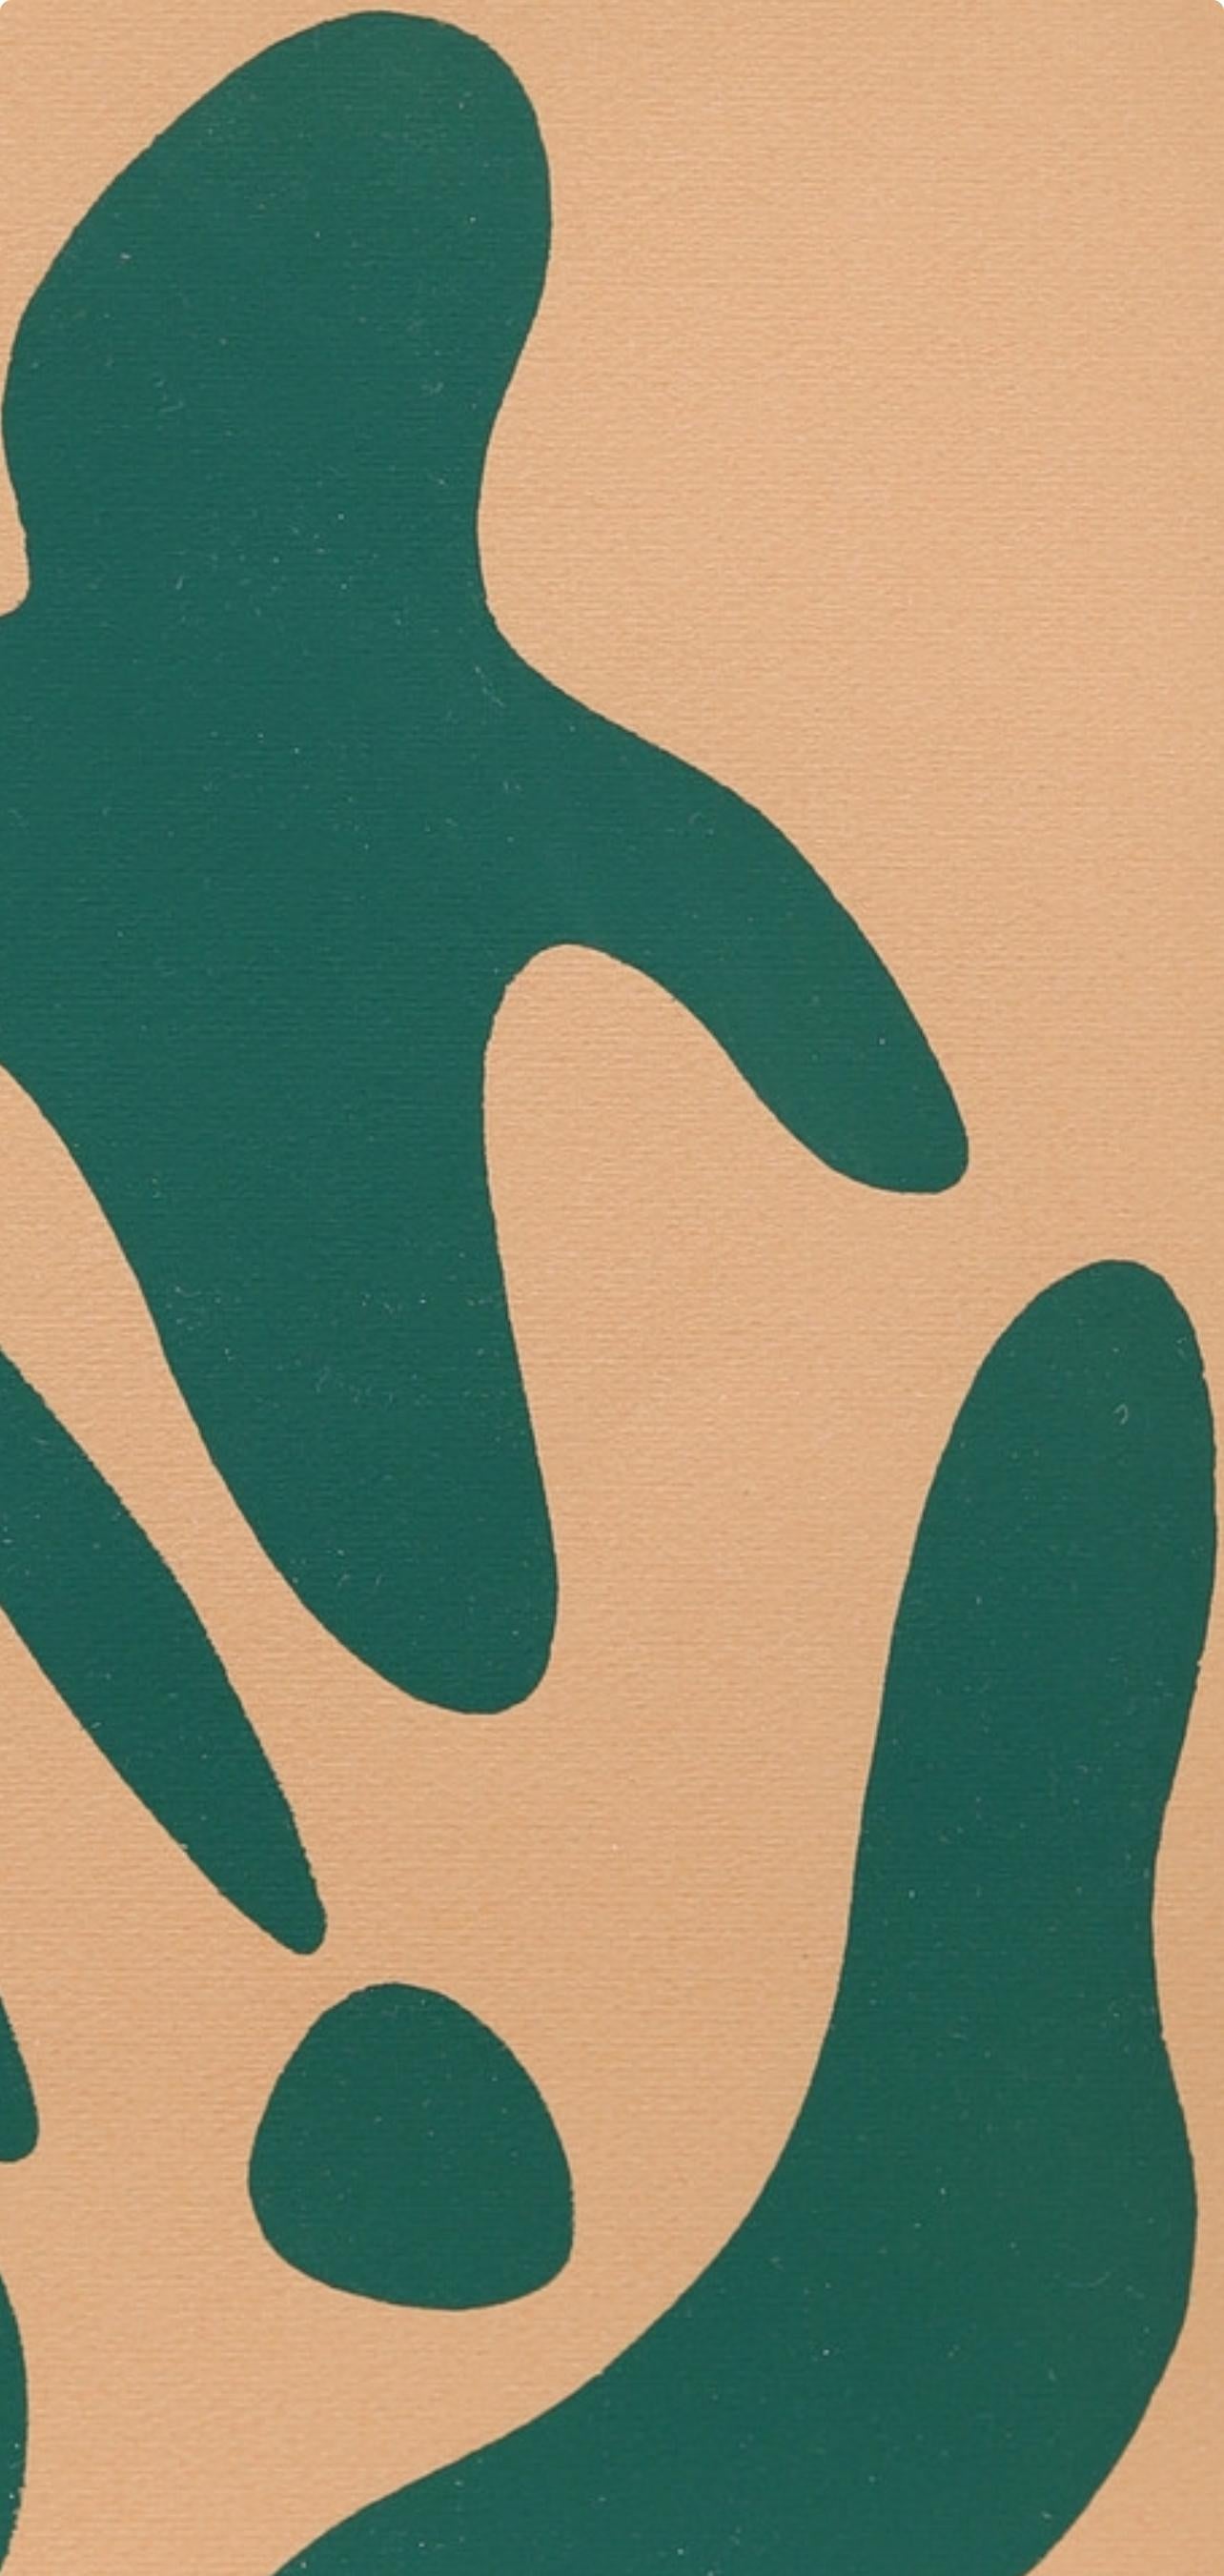 Arp, Constellation, XXe Siècle (after) - Surrealist Print by Jean Arp